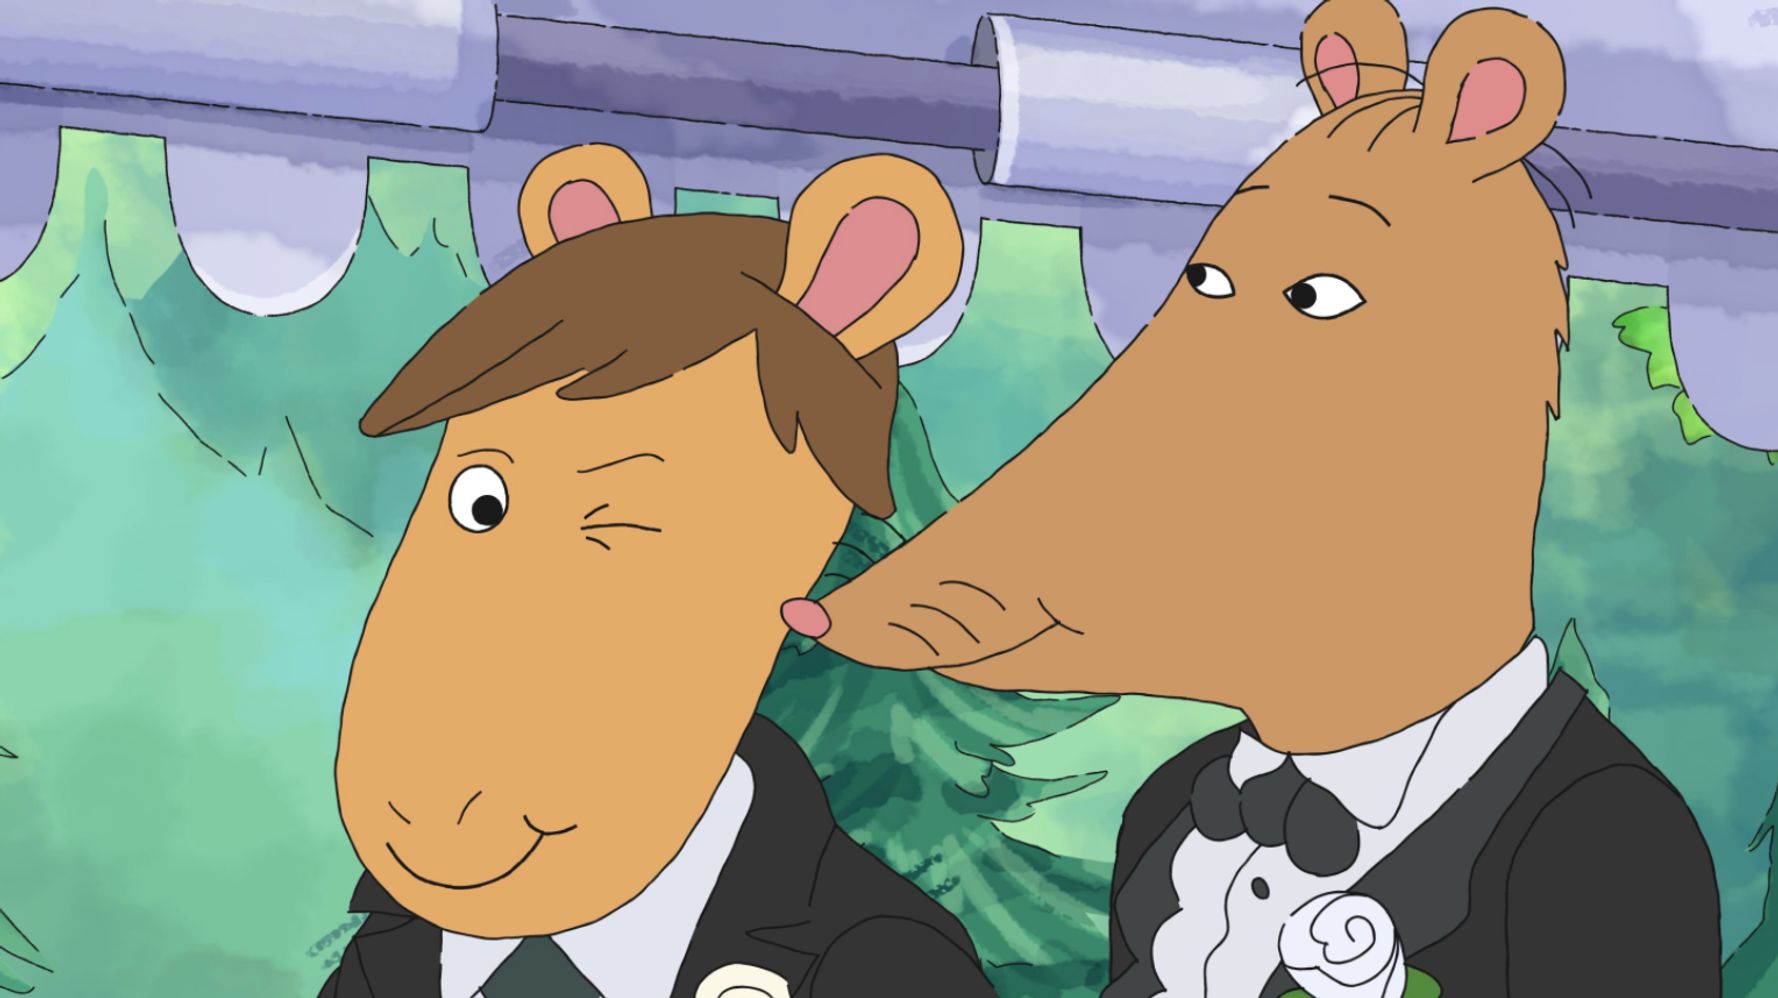 Twitter Users Celebrate Gay 'Arthur' Couple’s 2nd Wedding Anniversary